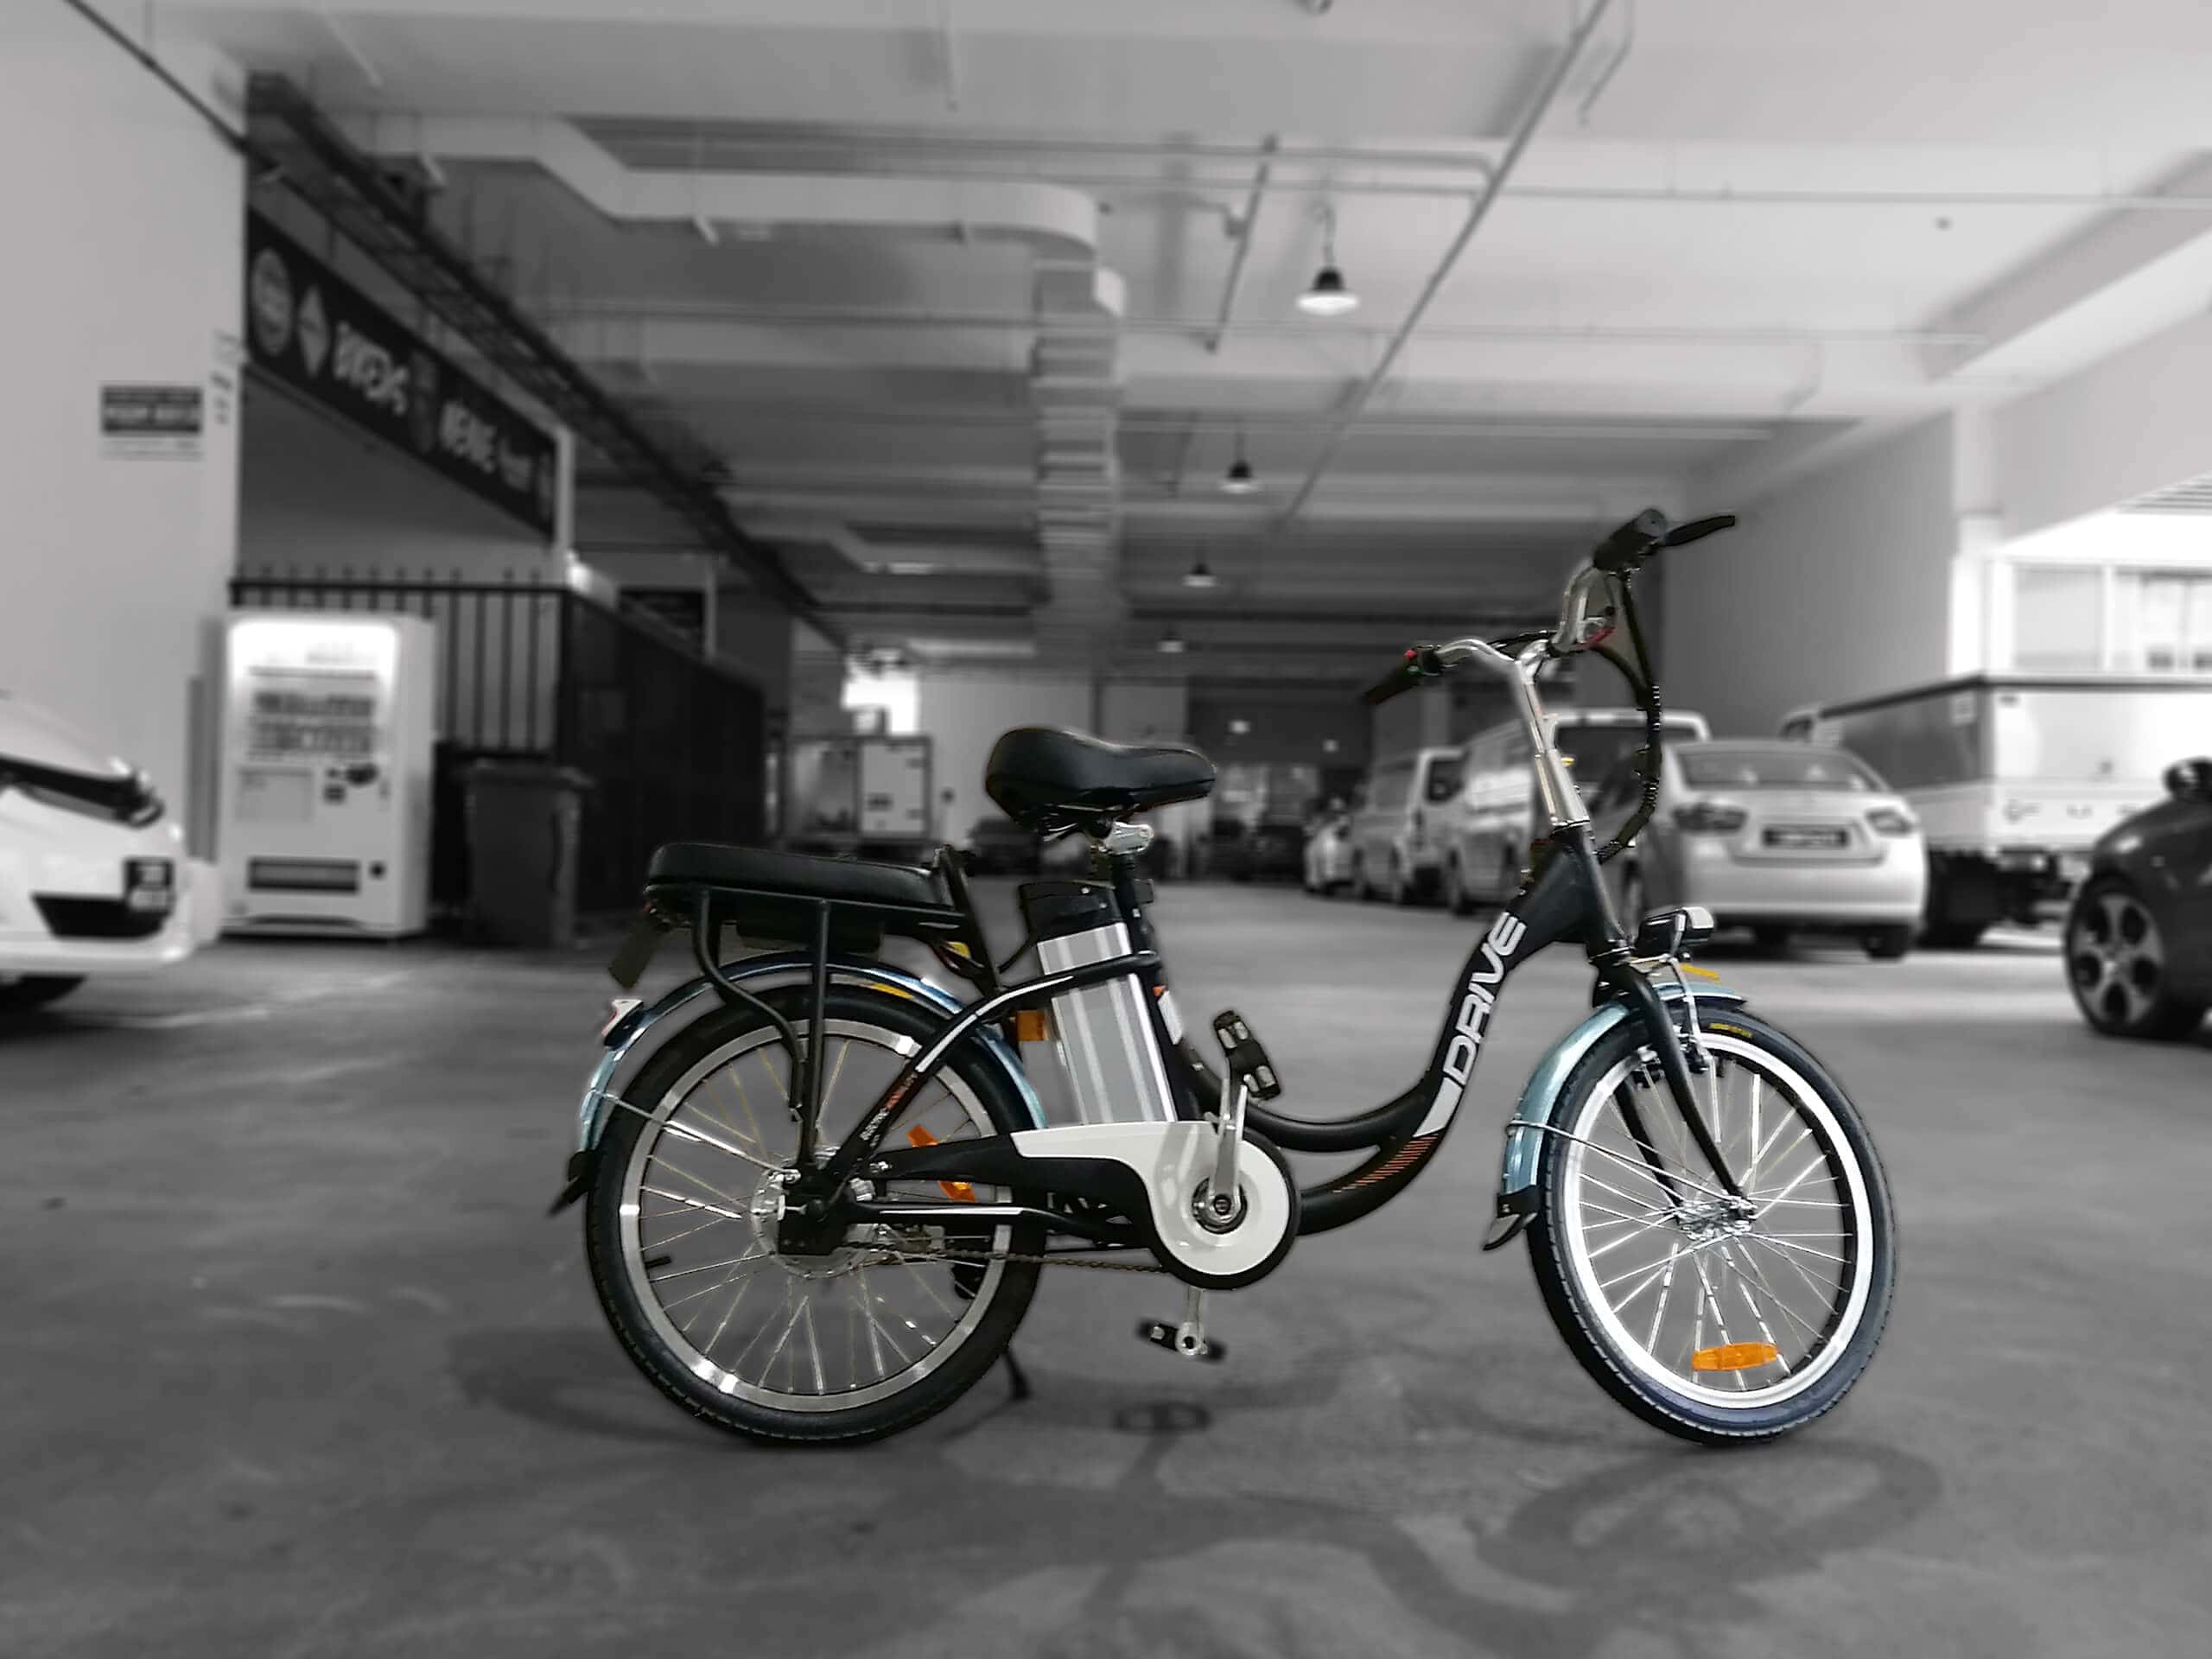 MOBOT ECO DRIVE BLACK LTA approved ebike at WCEGA Plaza - Is ebike the future of cycling?